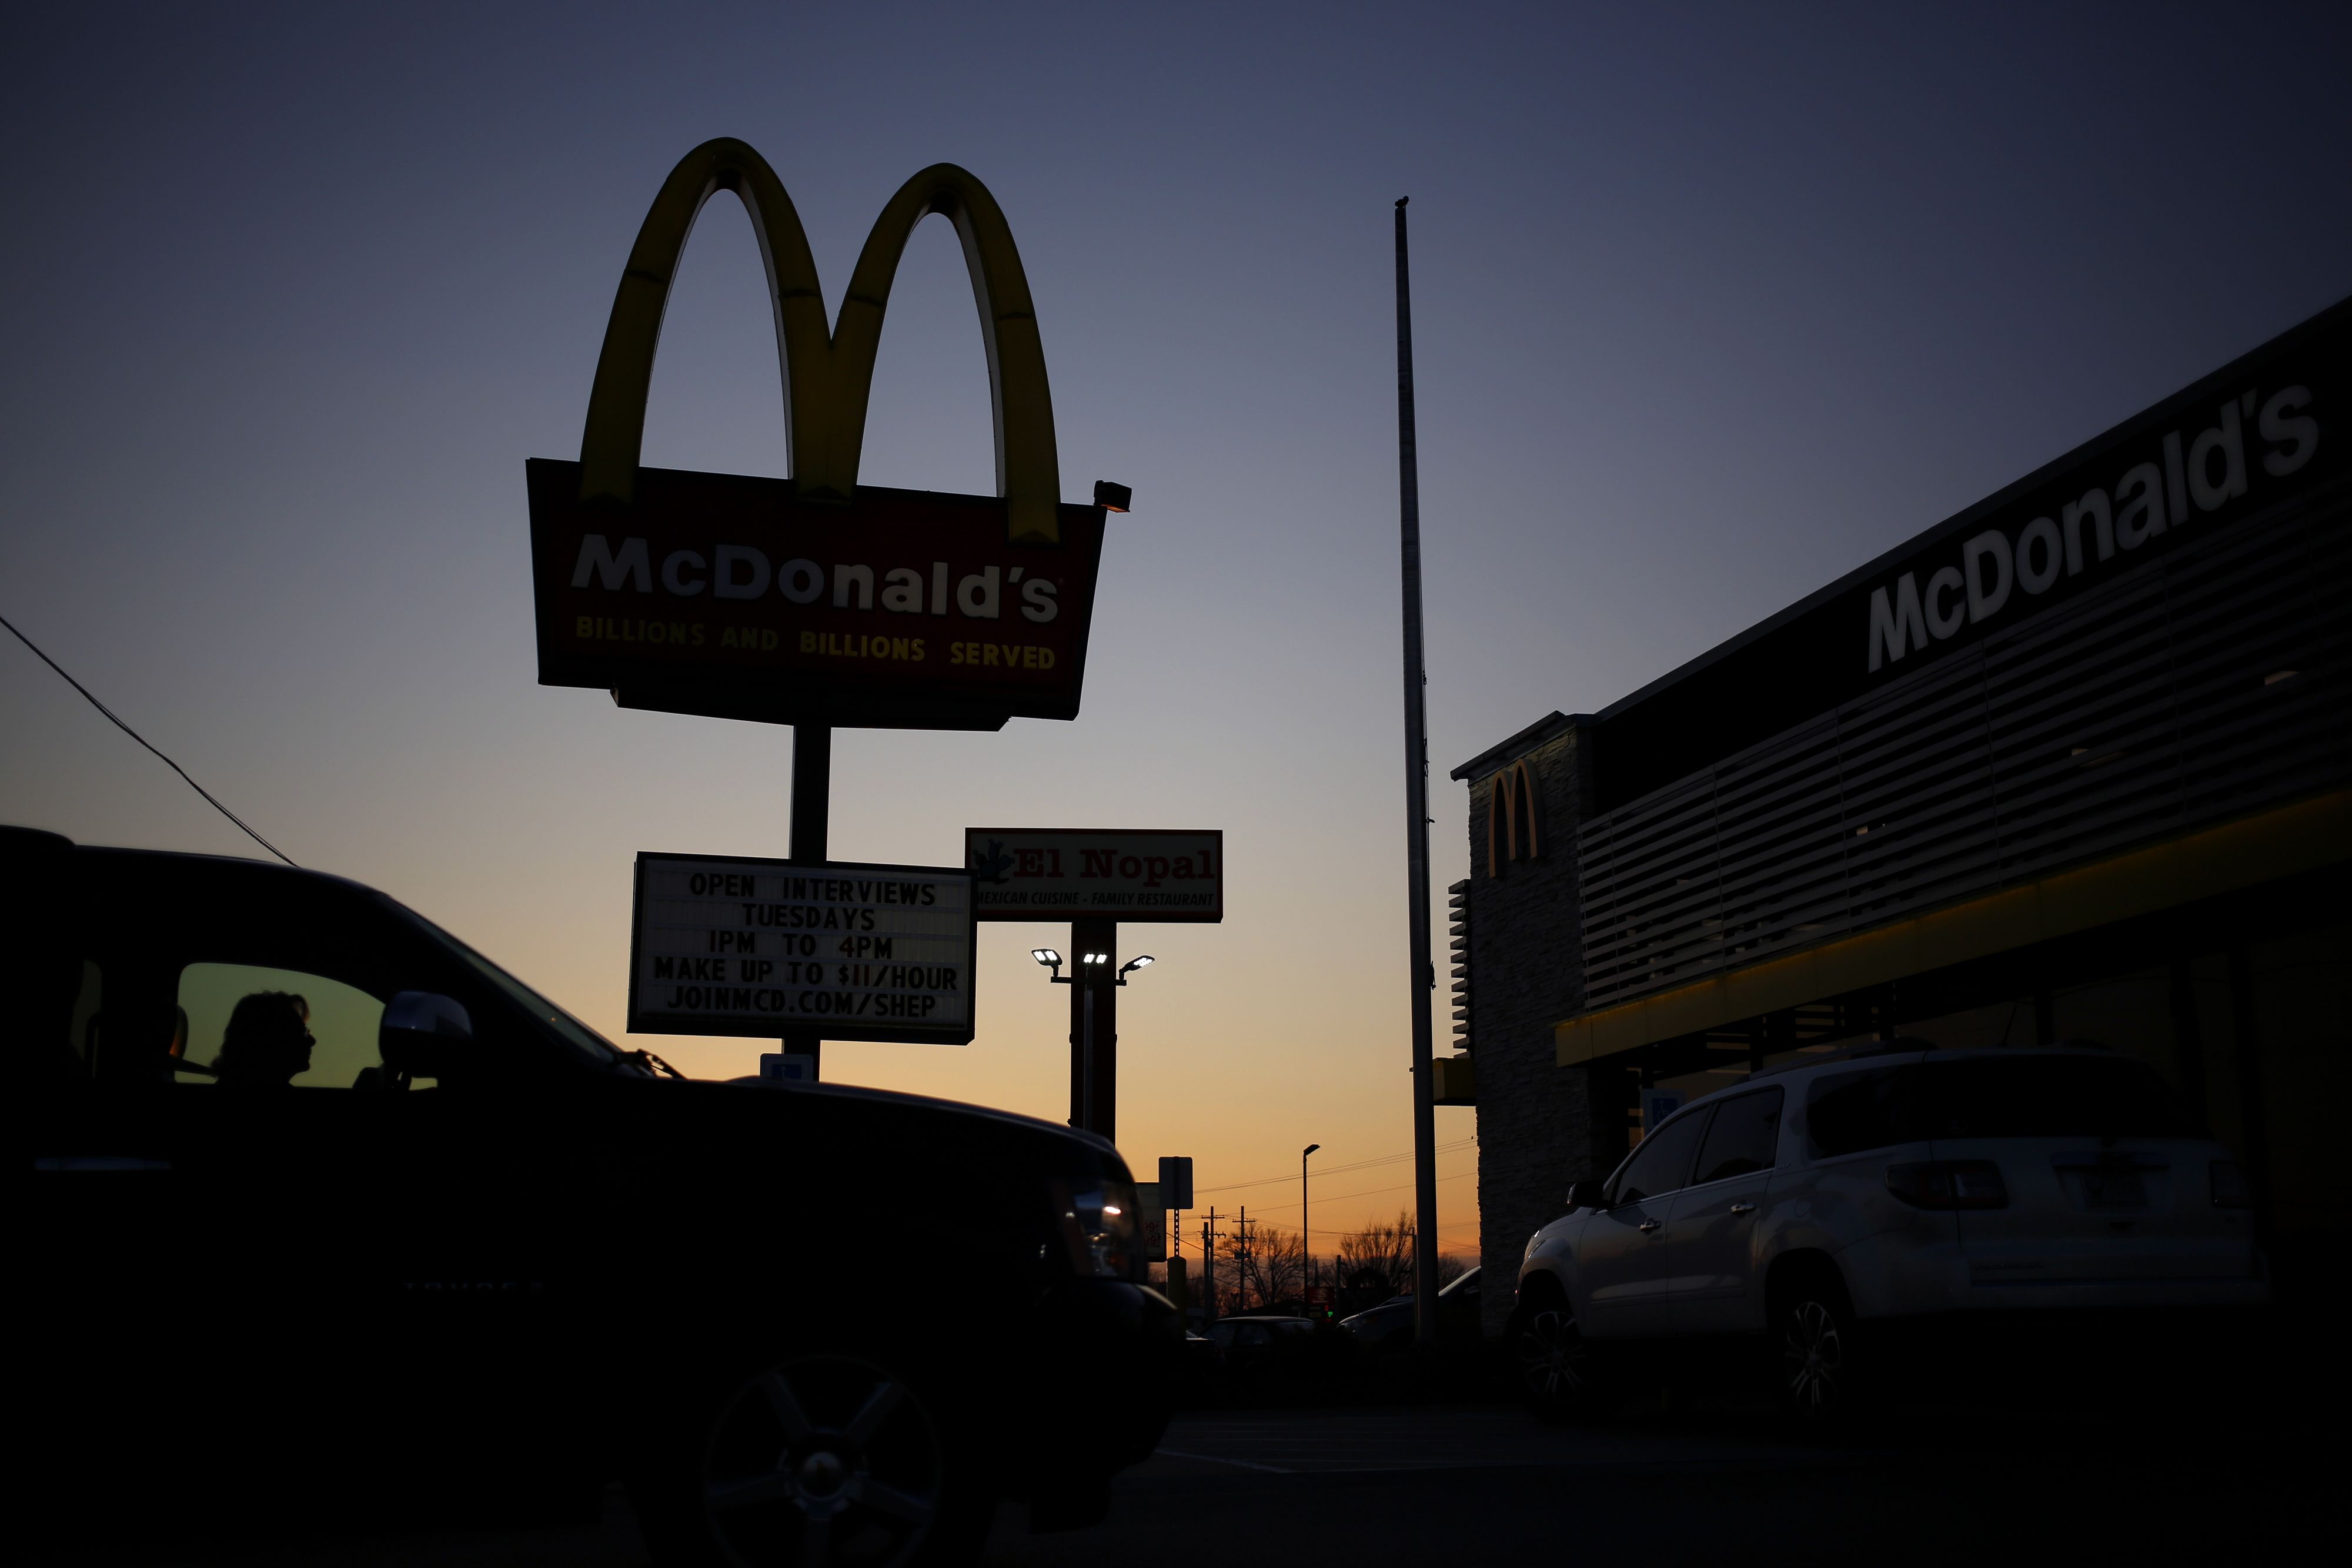 Earnings season sees whiffs on Tuesday with McDonalds, UPS and Lockheed